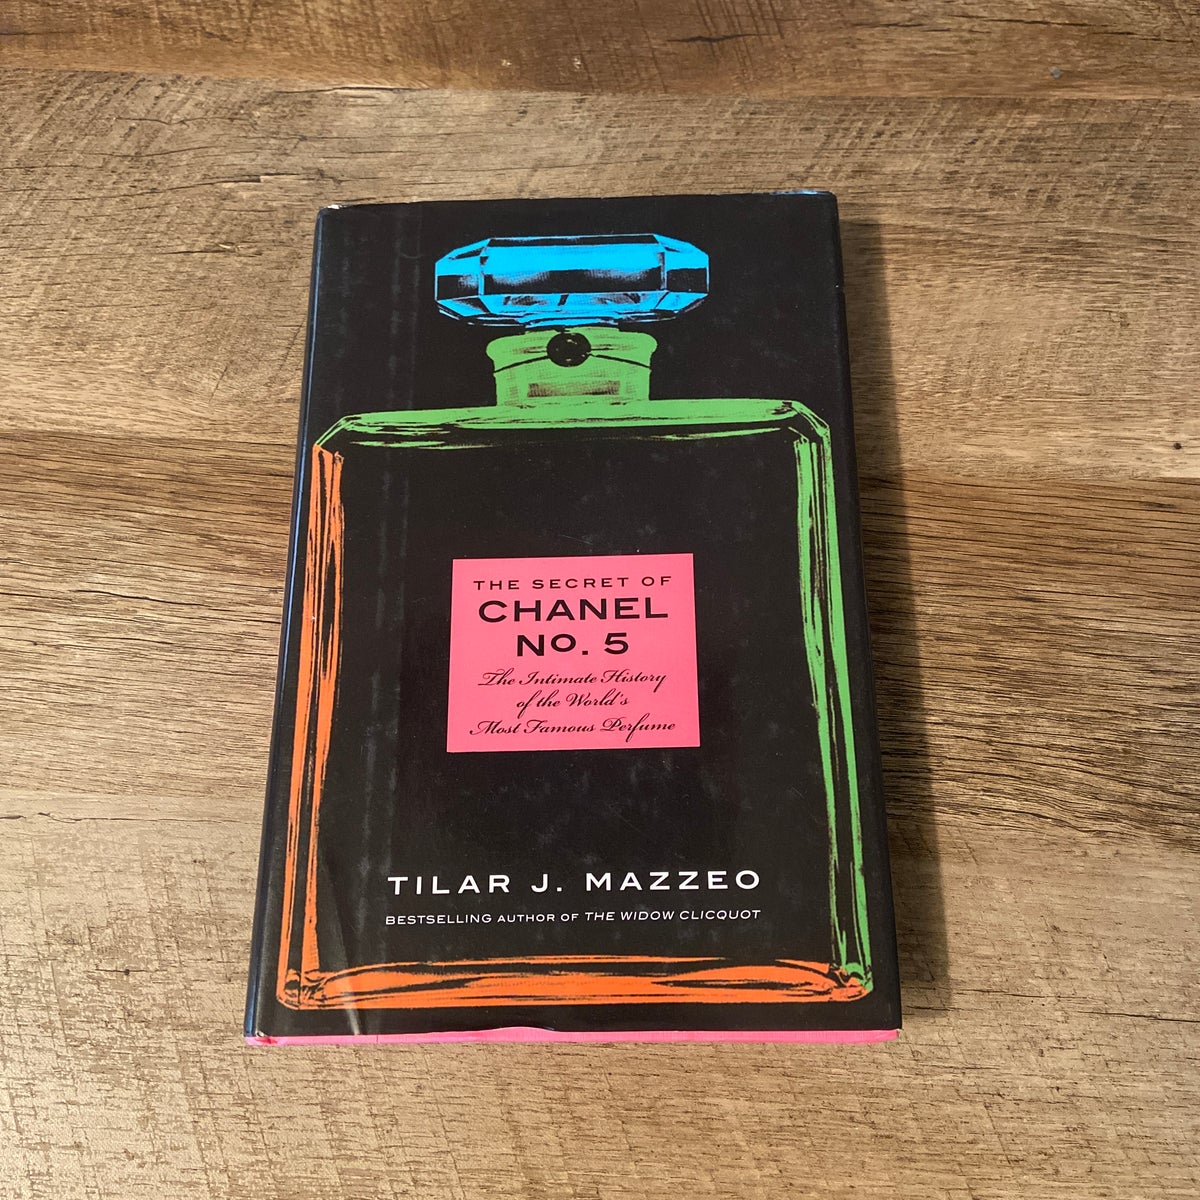 The History of Chanel No. 5